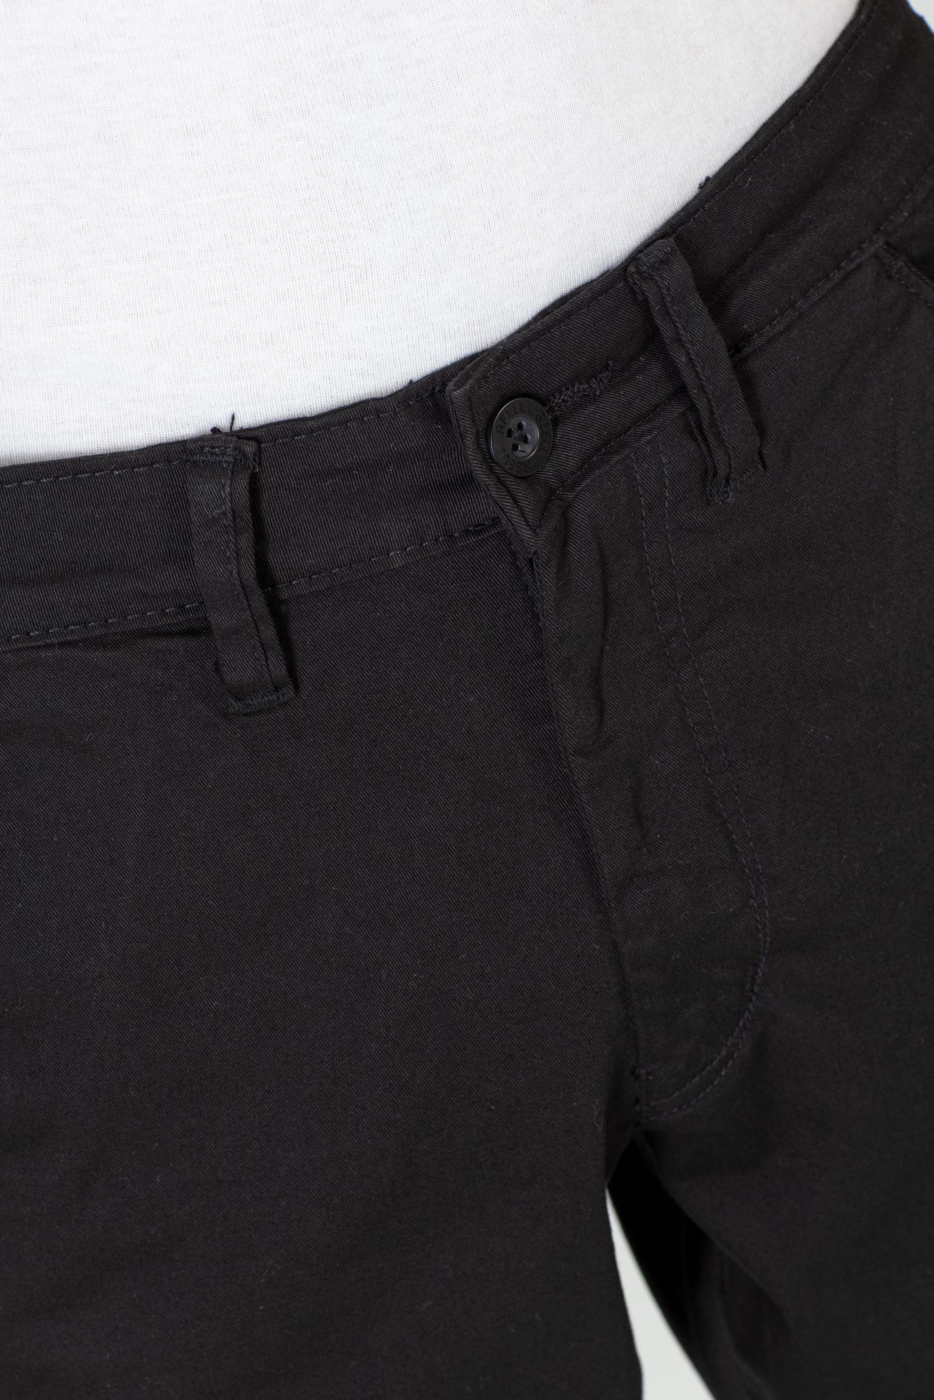 Flex Tapered Chino Black REELL-SHOP | The Official Reell Online Shop